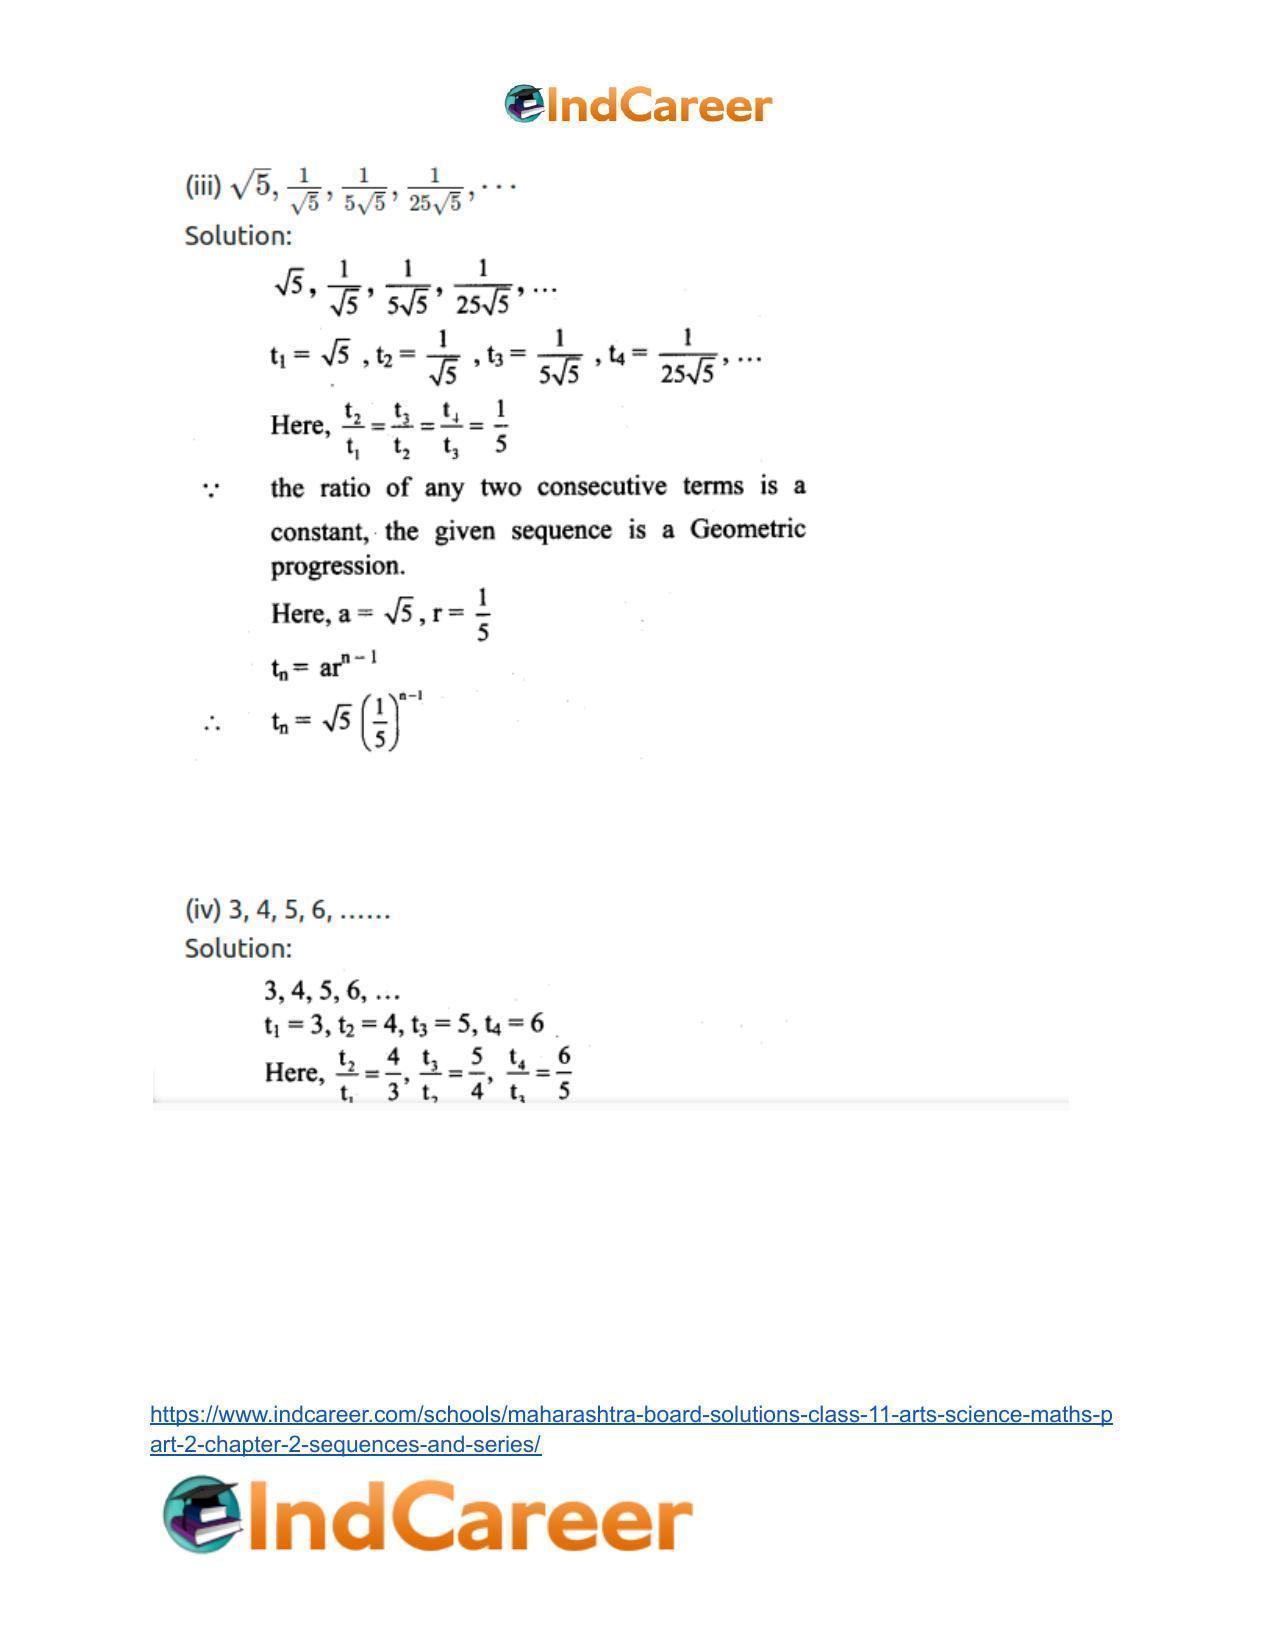 Maharashtra Board Solutions Class 11-Arts & Science Maths (Part 2): Chapter 2- Sequences and Series - Page 5